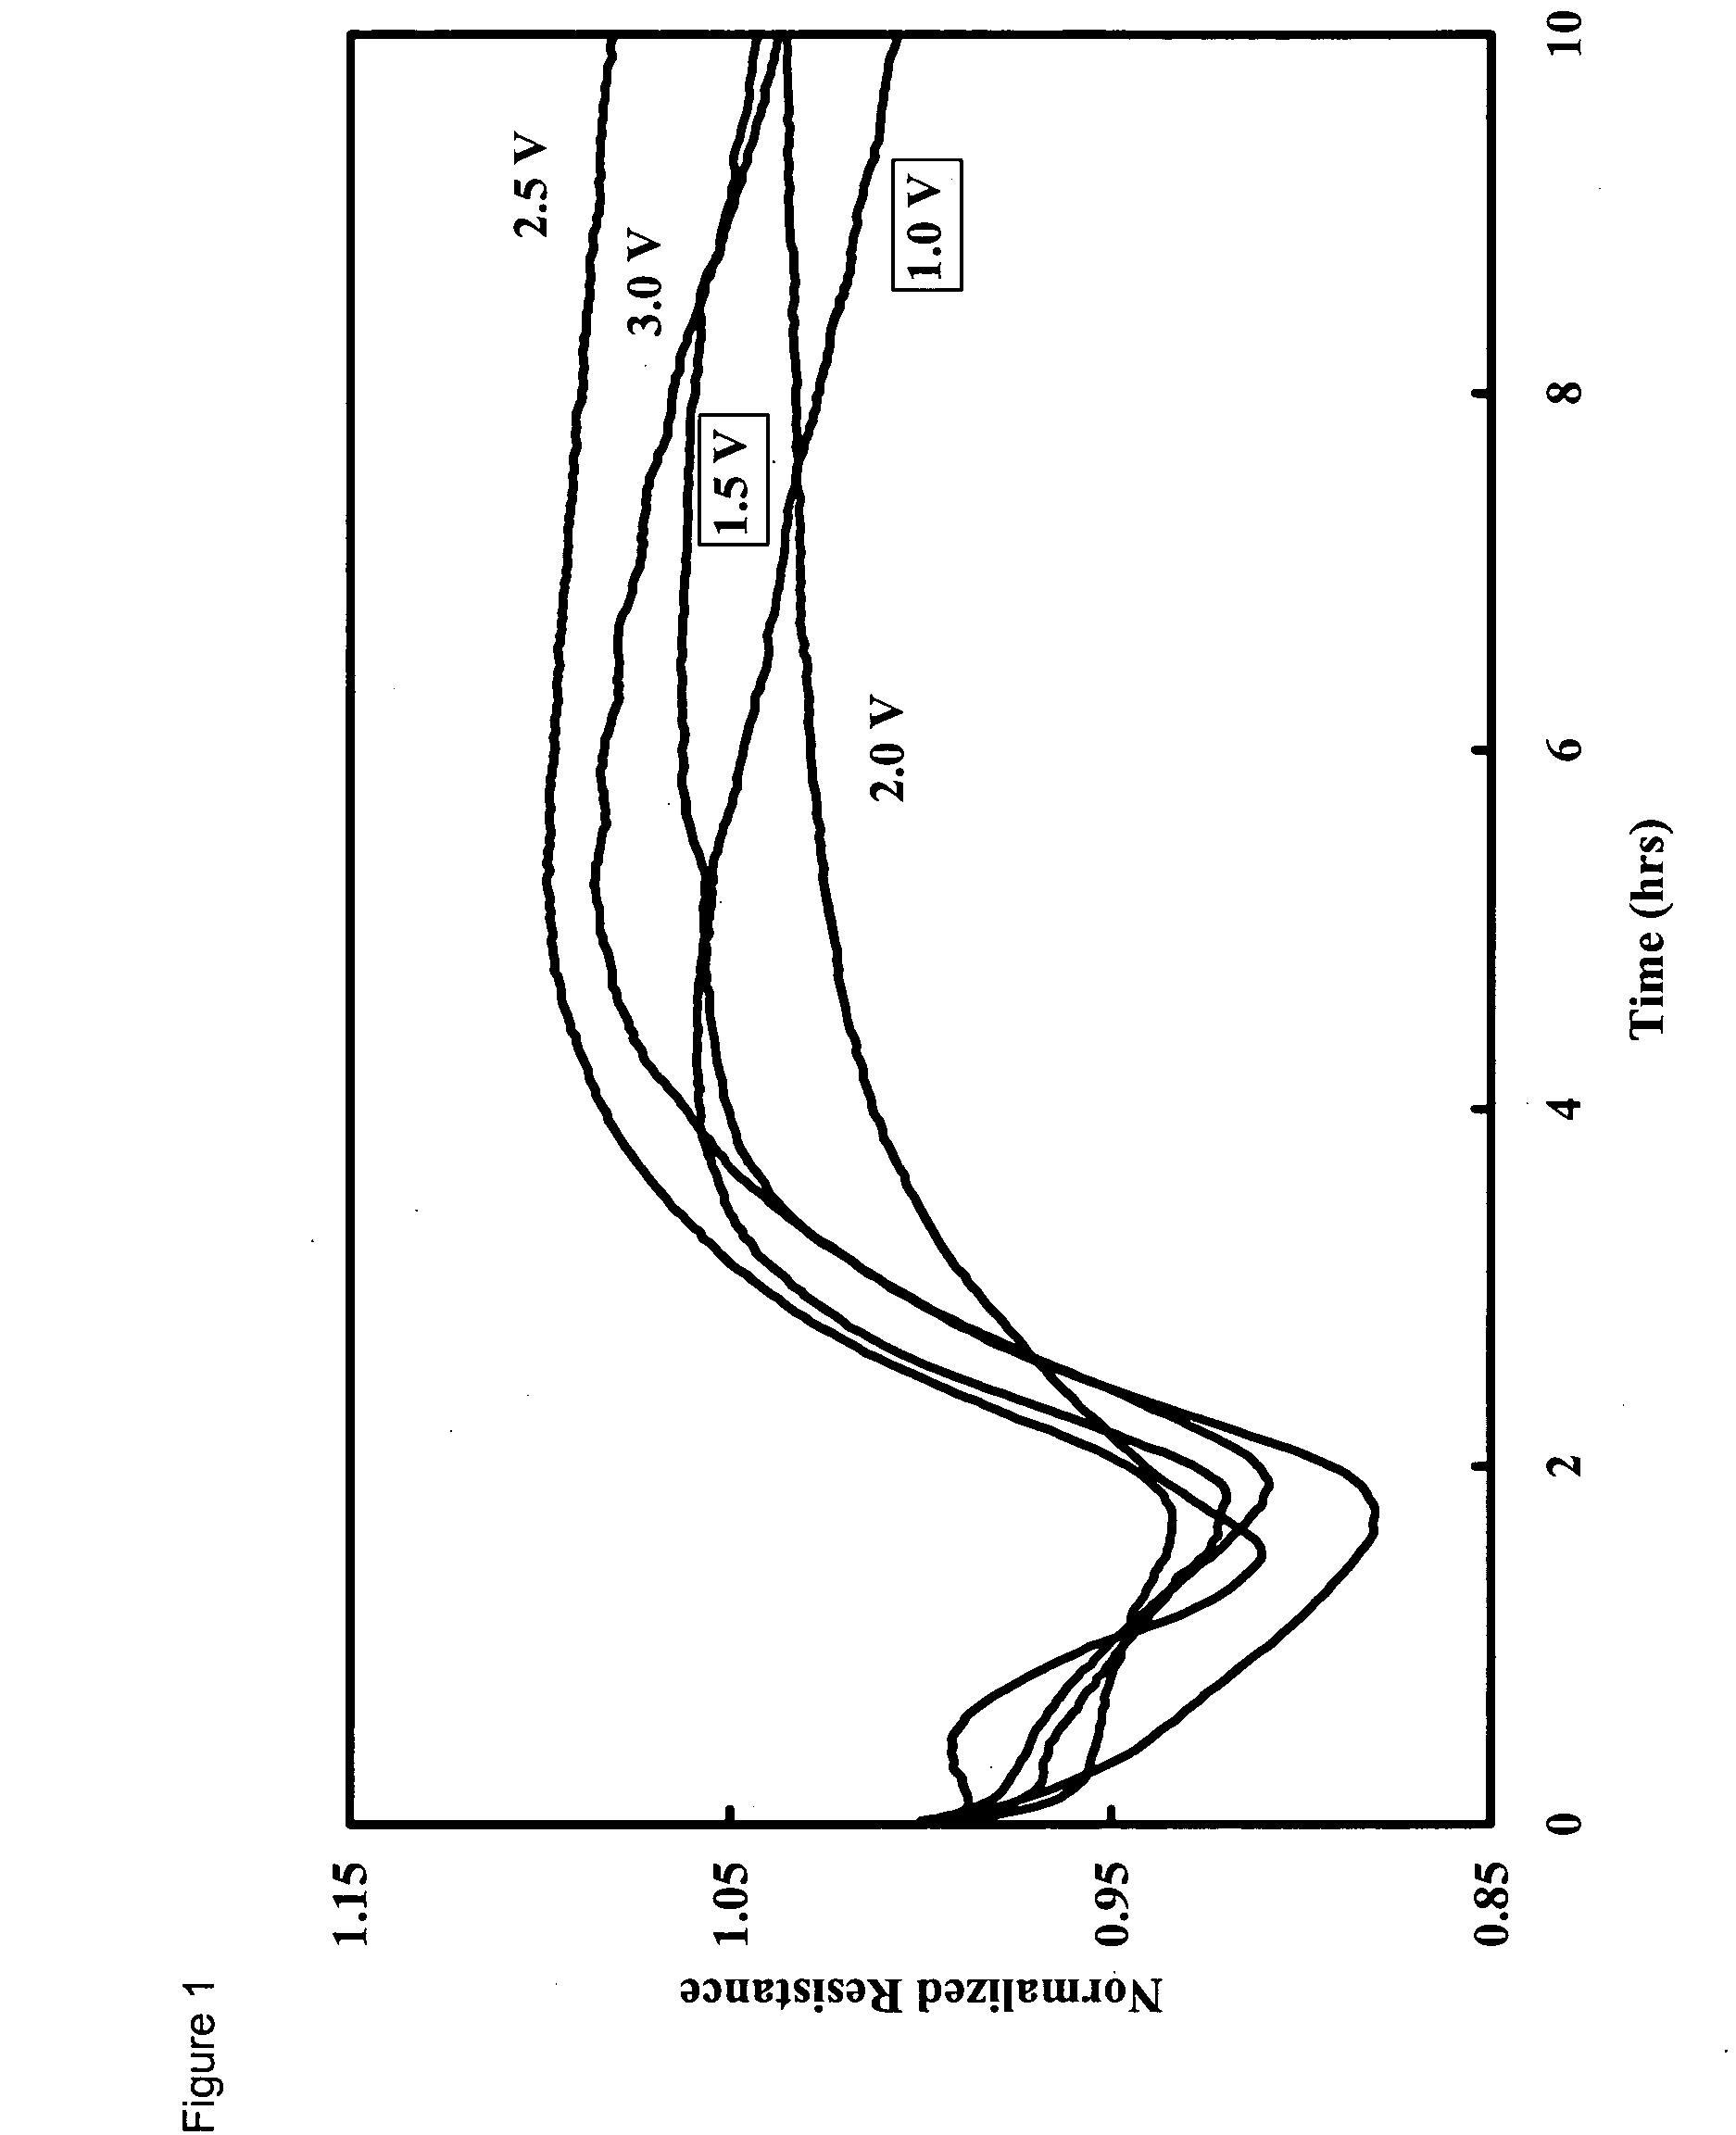 Method and apparatus for the detection of microorganisms